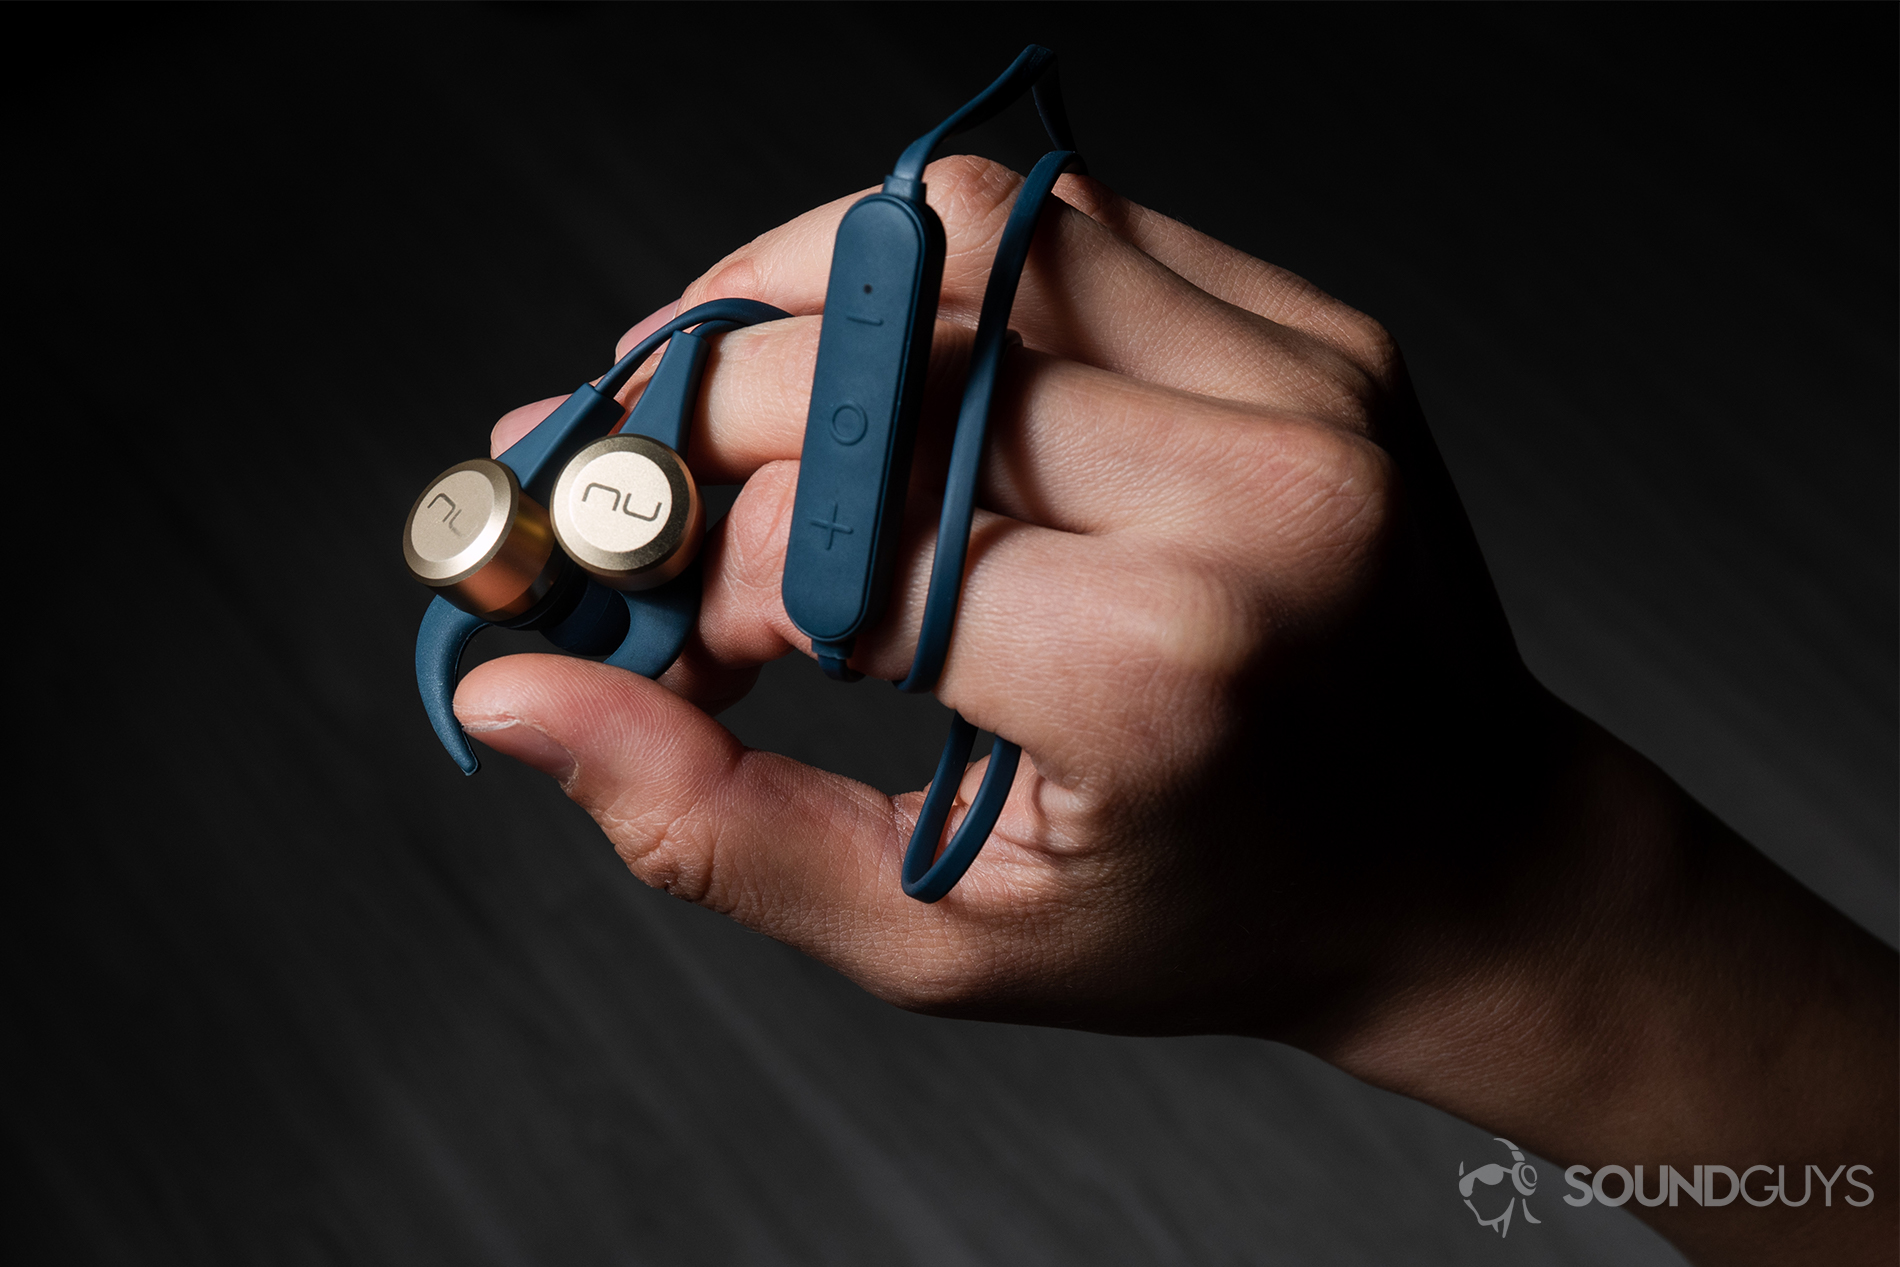 Optoma NuForce Be Live5: The earbuds with the wire wrapped around the hand.